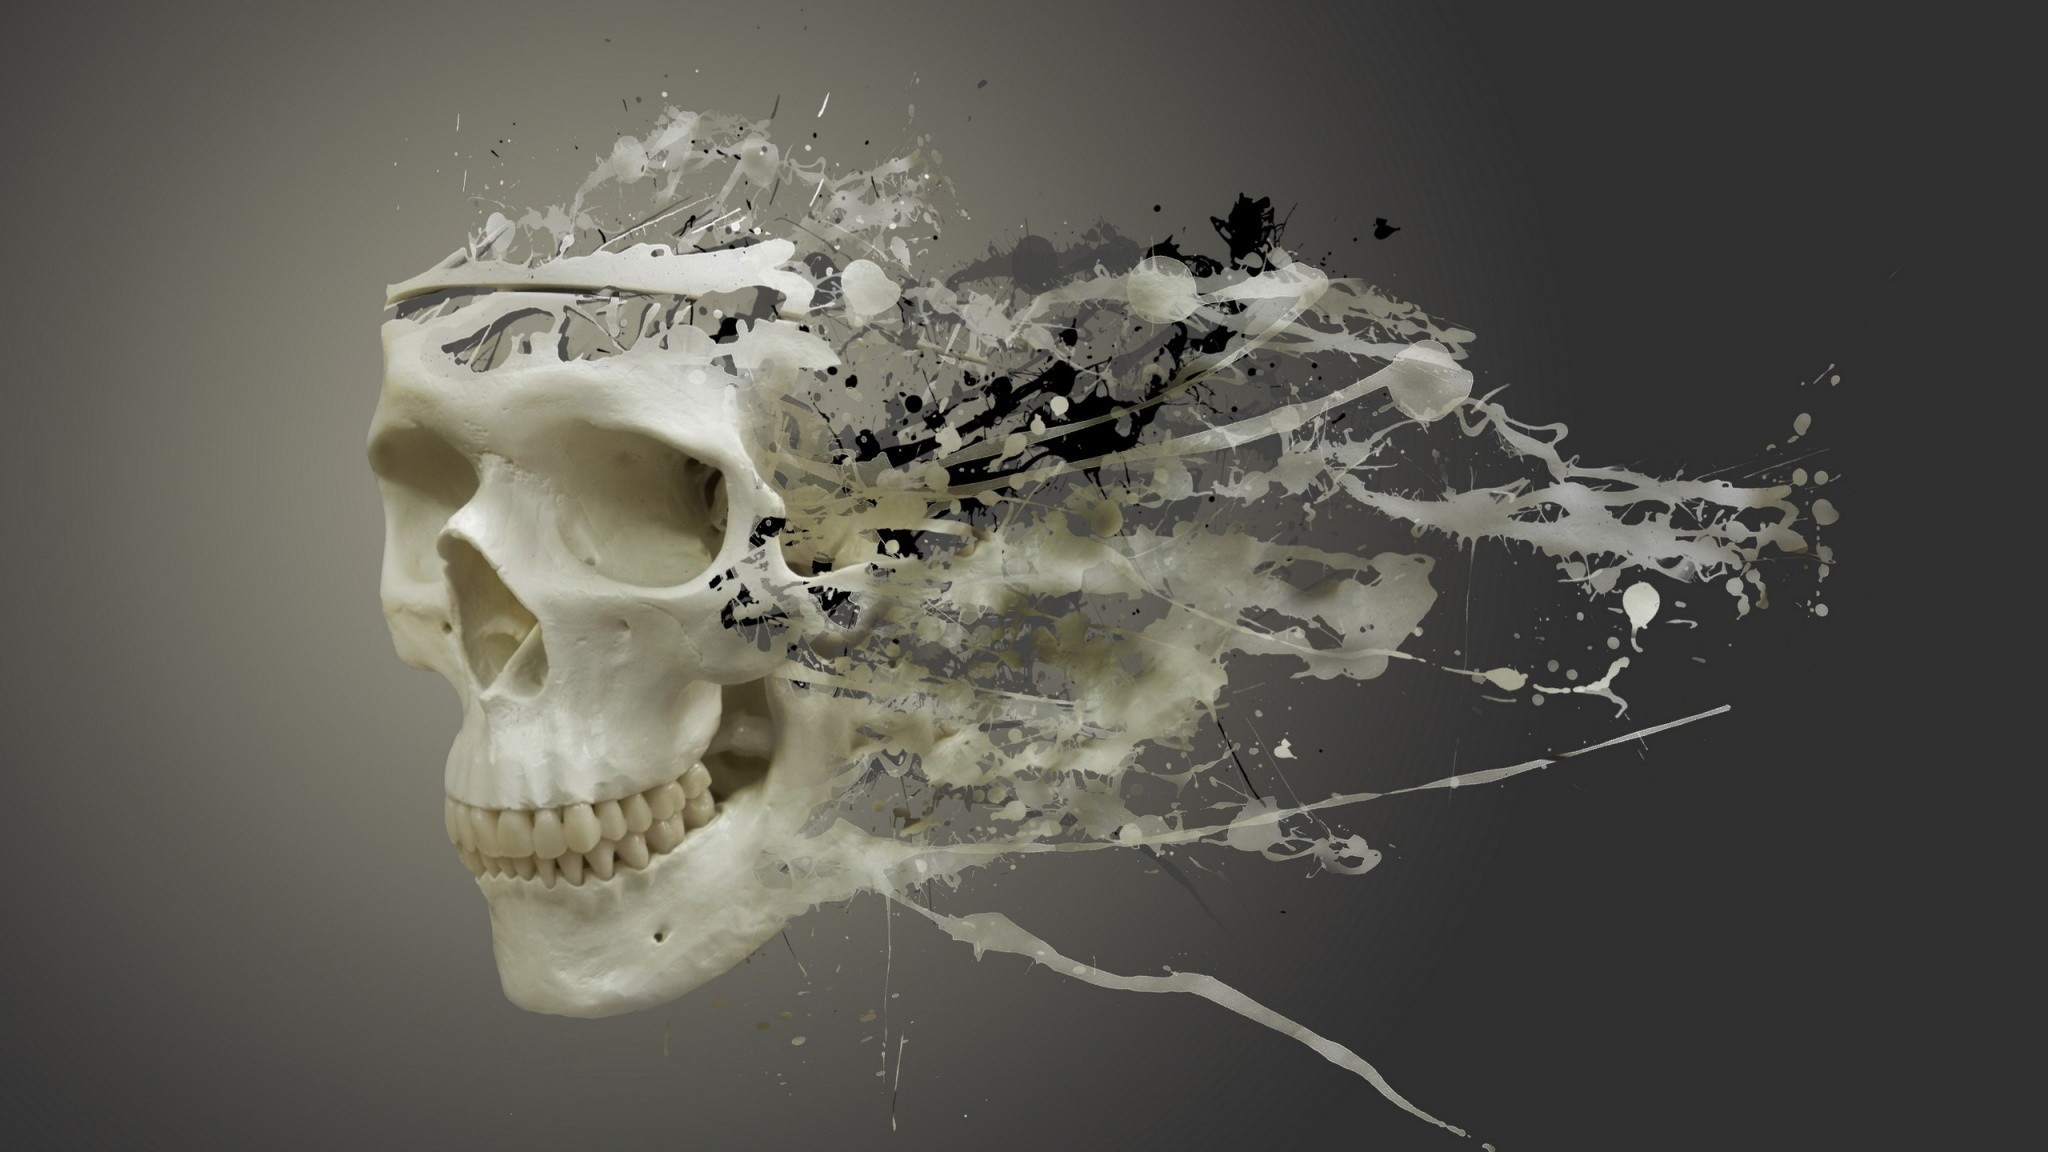 2048x1152 Disintegrating Skull by hridoy74. This would make an amazing tattoo.